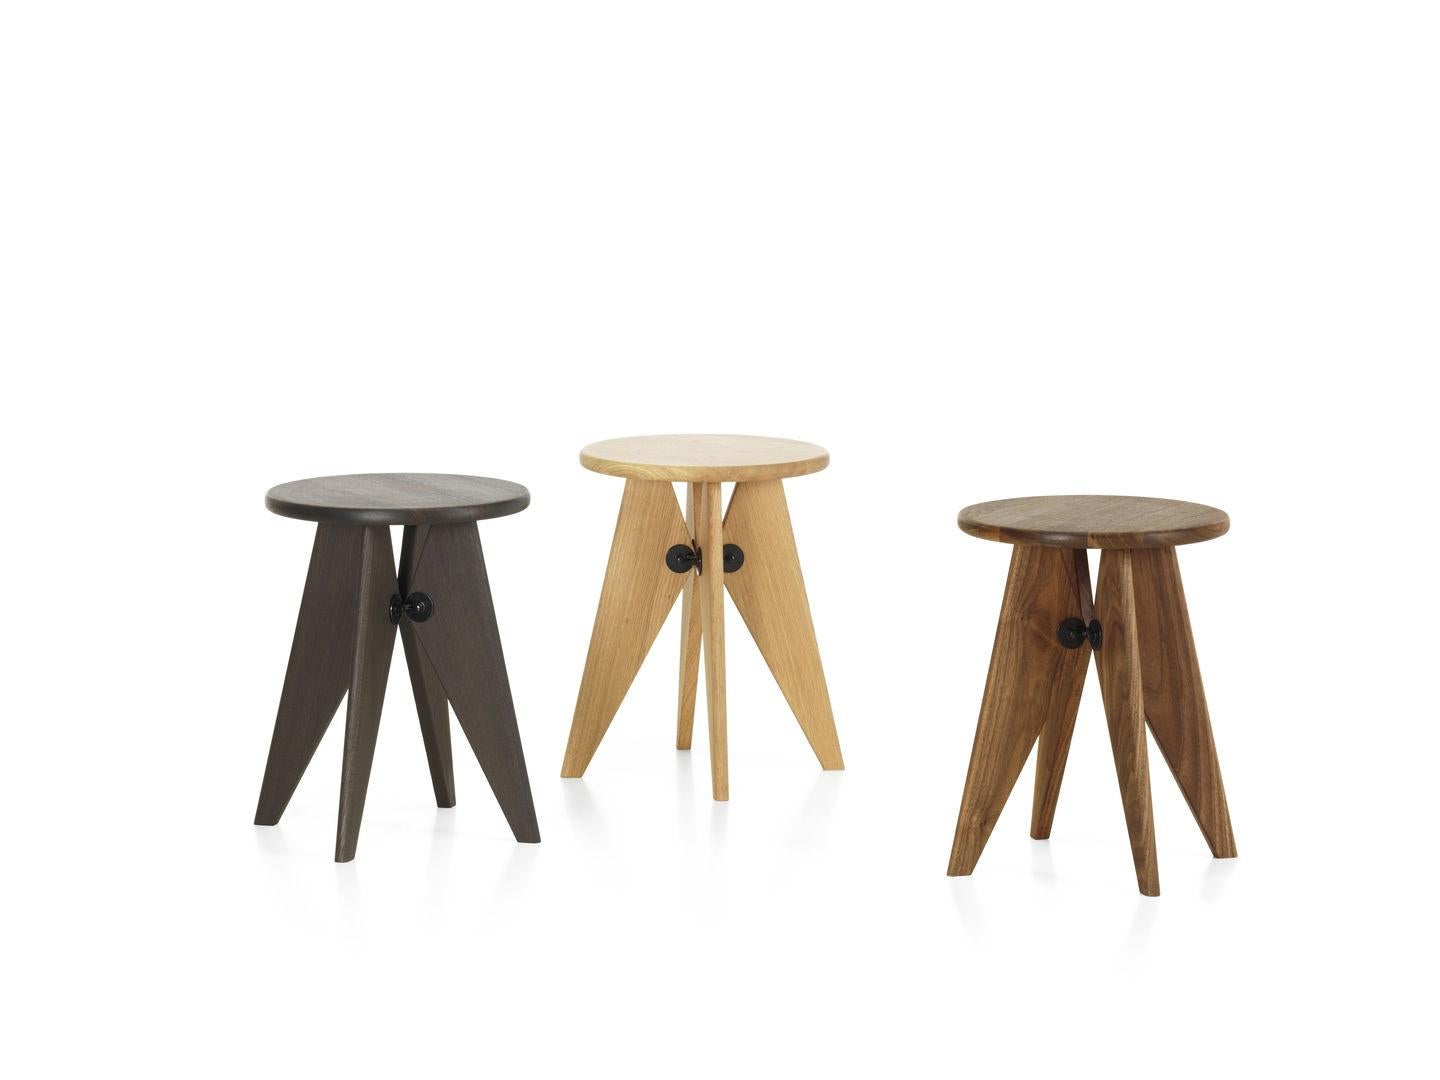 Vitra Tabouret Solvay stool in natural oak by Jean Prouvé. Tabouret Solvay bears the unmistakable signature of Jean Prouvé, reflecting an aesthetic based on structural requirements. Tabouret Solvay is a simple, robust stool made of solid wood that